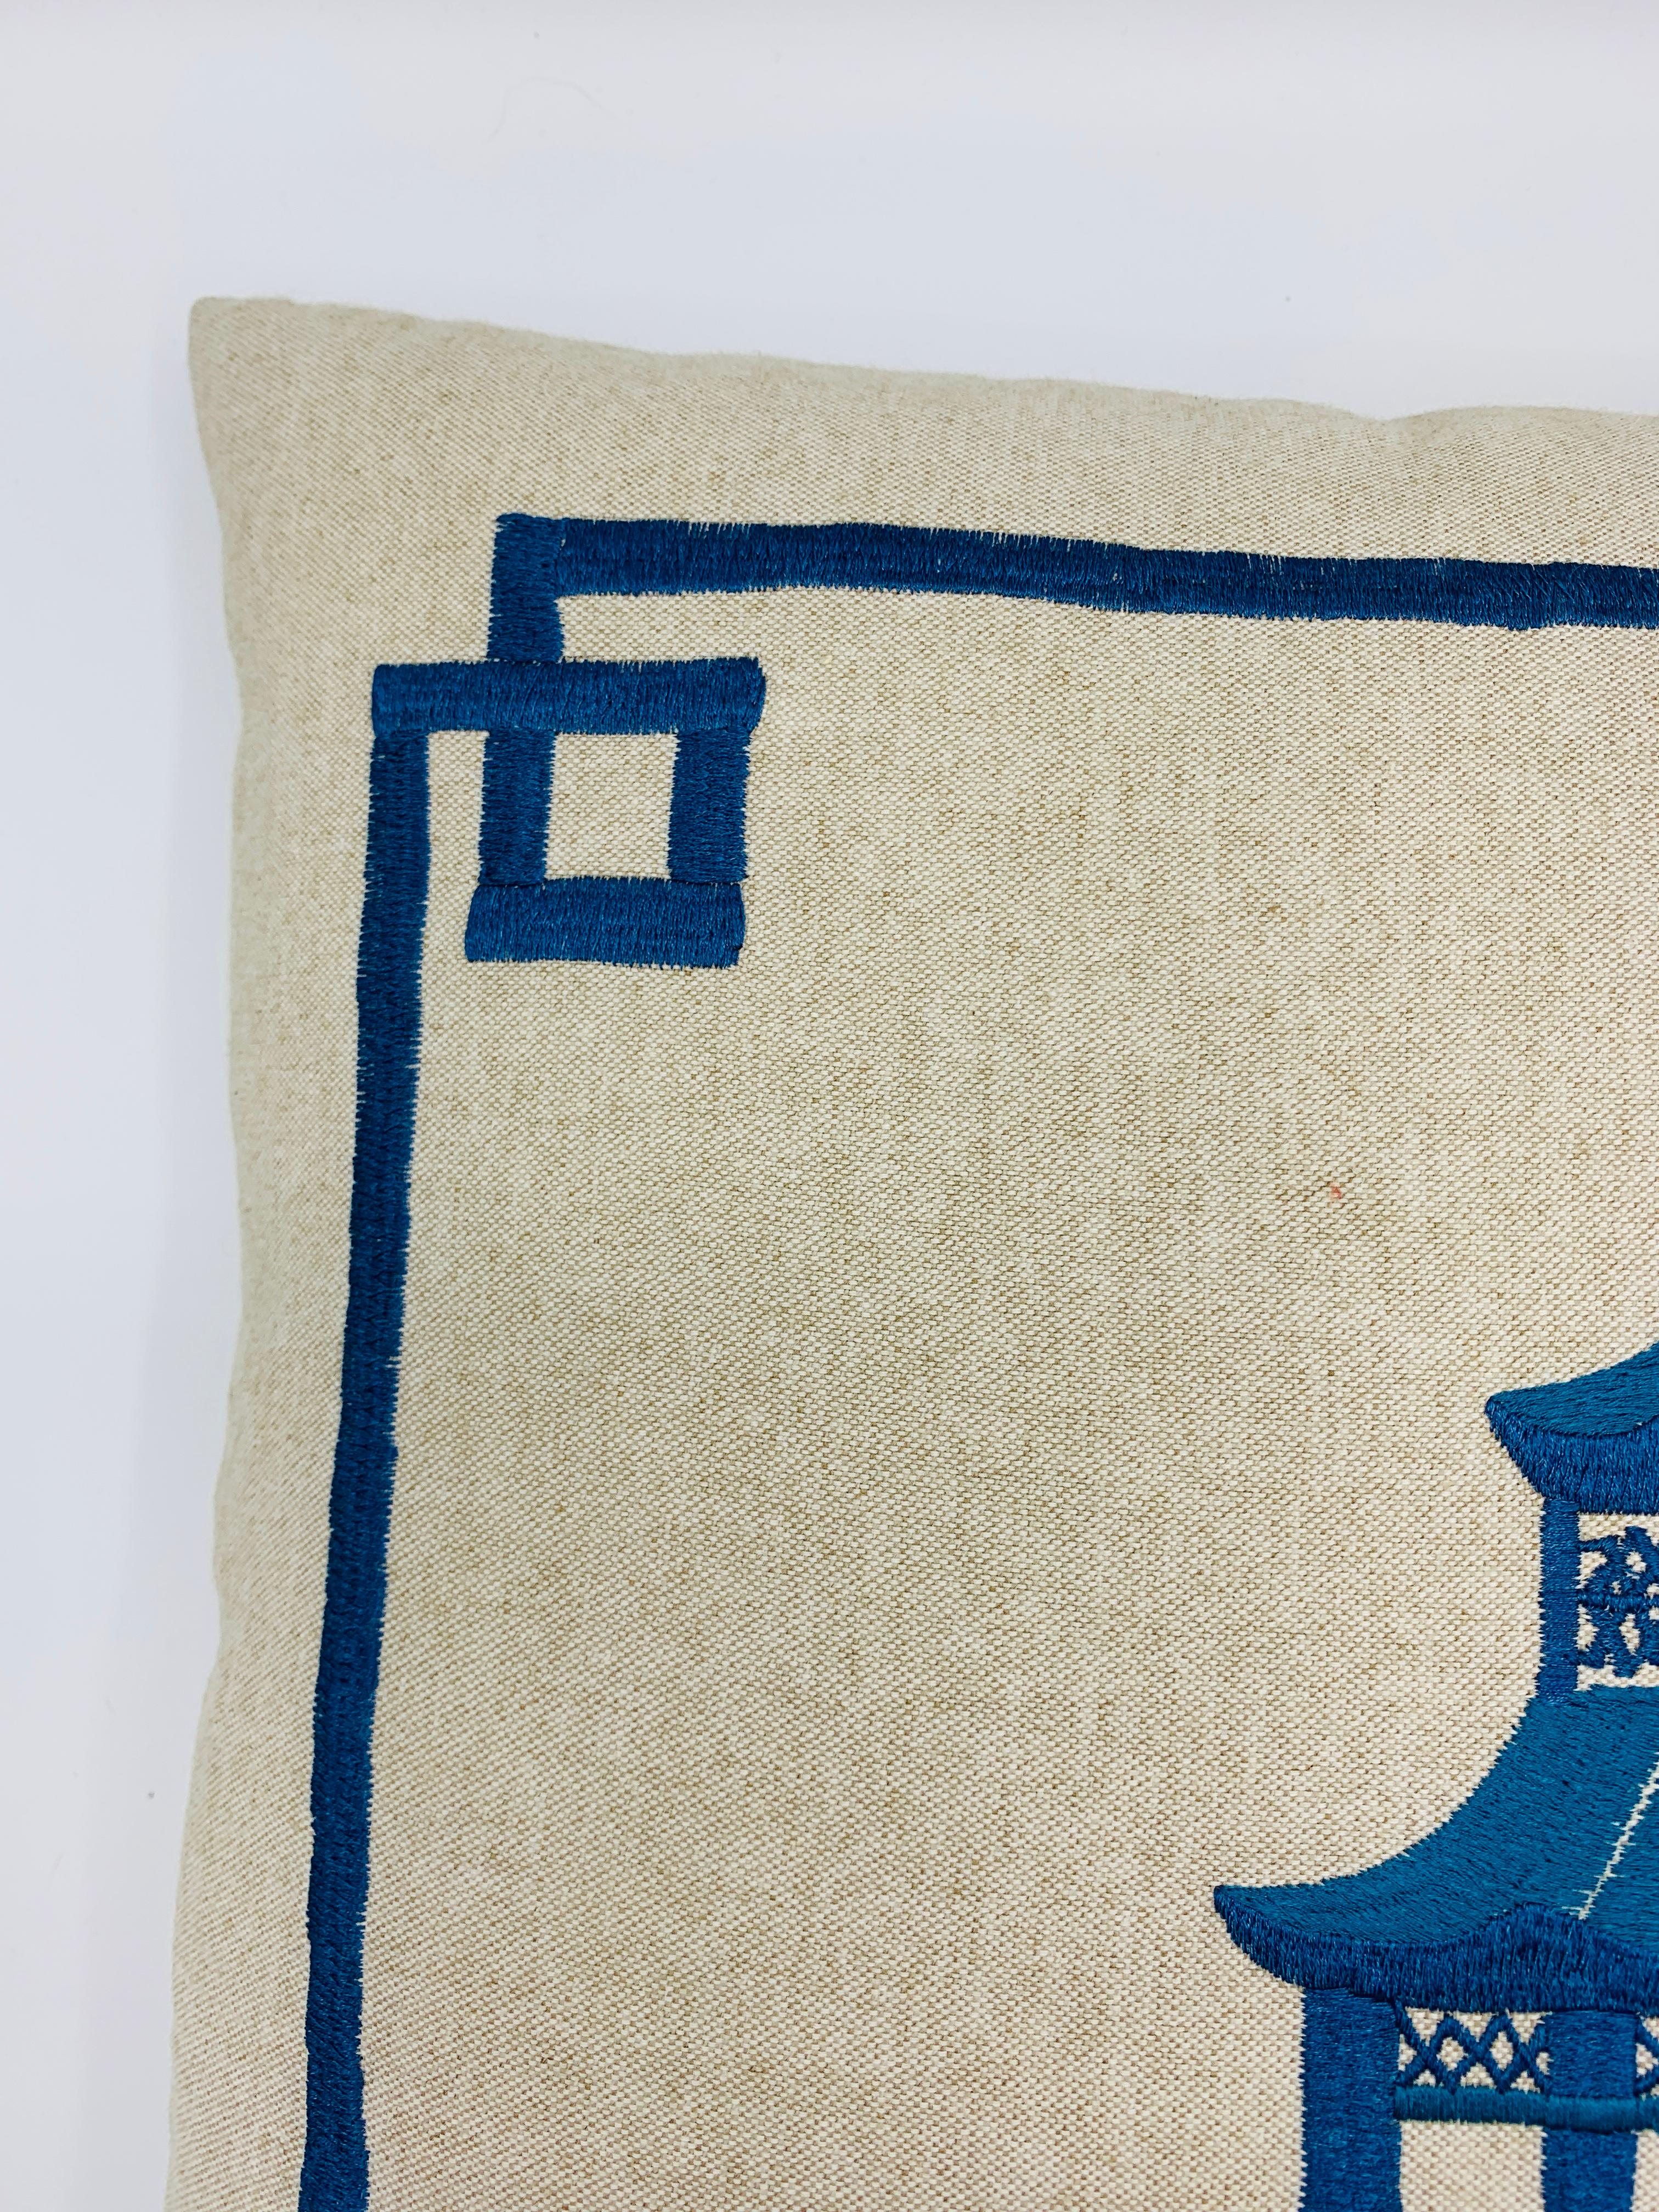 Listed is a stunning, custom chinoiserie decorative pillow. The piece has a large, heavily detailed, two-tone blue/teal Pagoda motif embroidery with a modern fretwork embroidery along the border. Linen-cotton blend. Zipper closure. Includes down